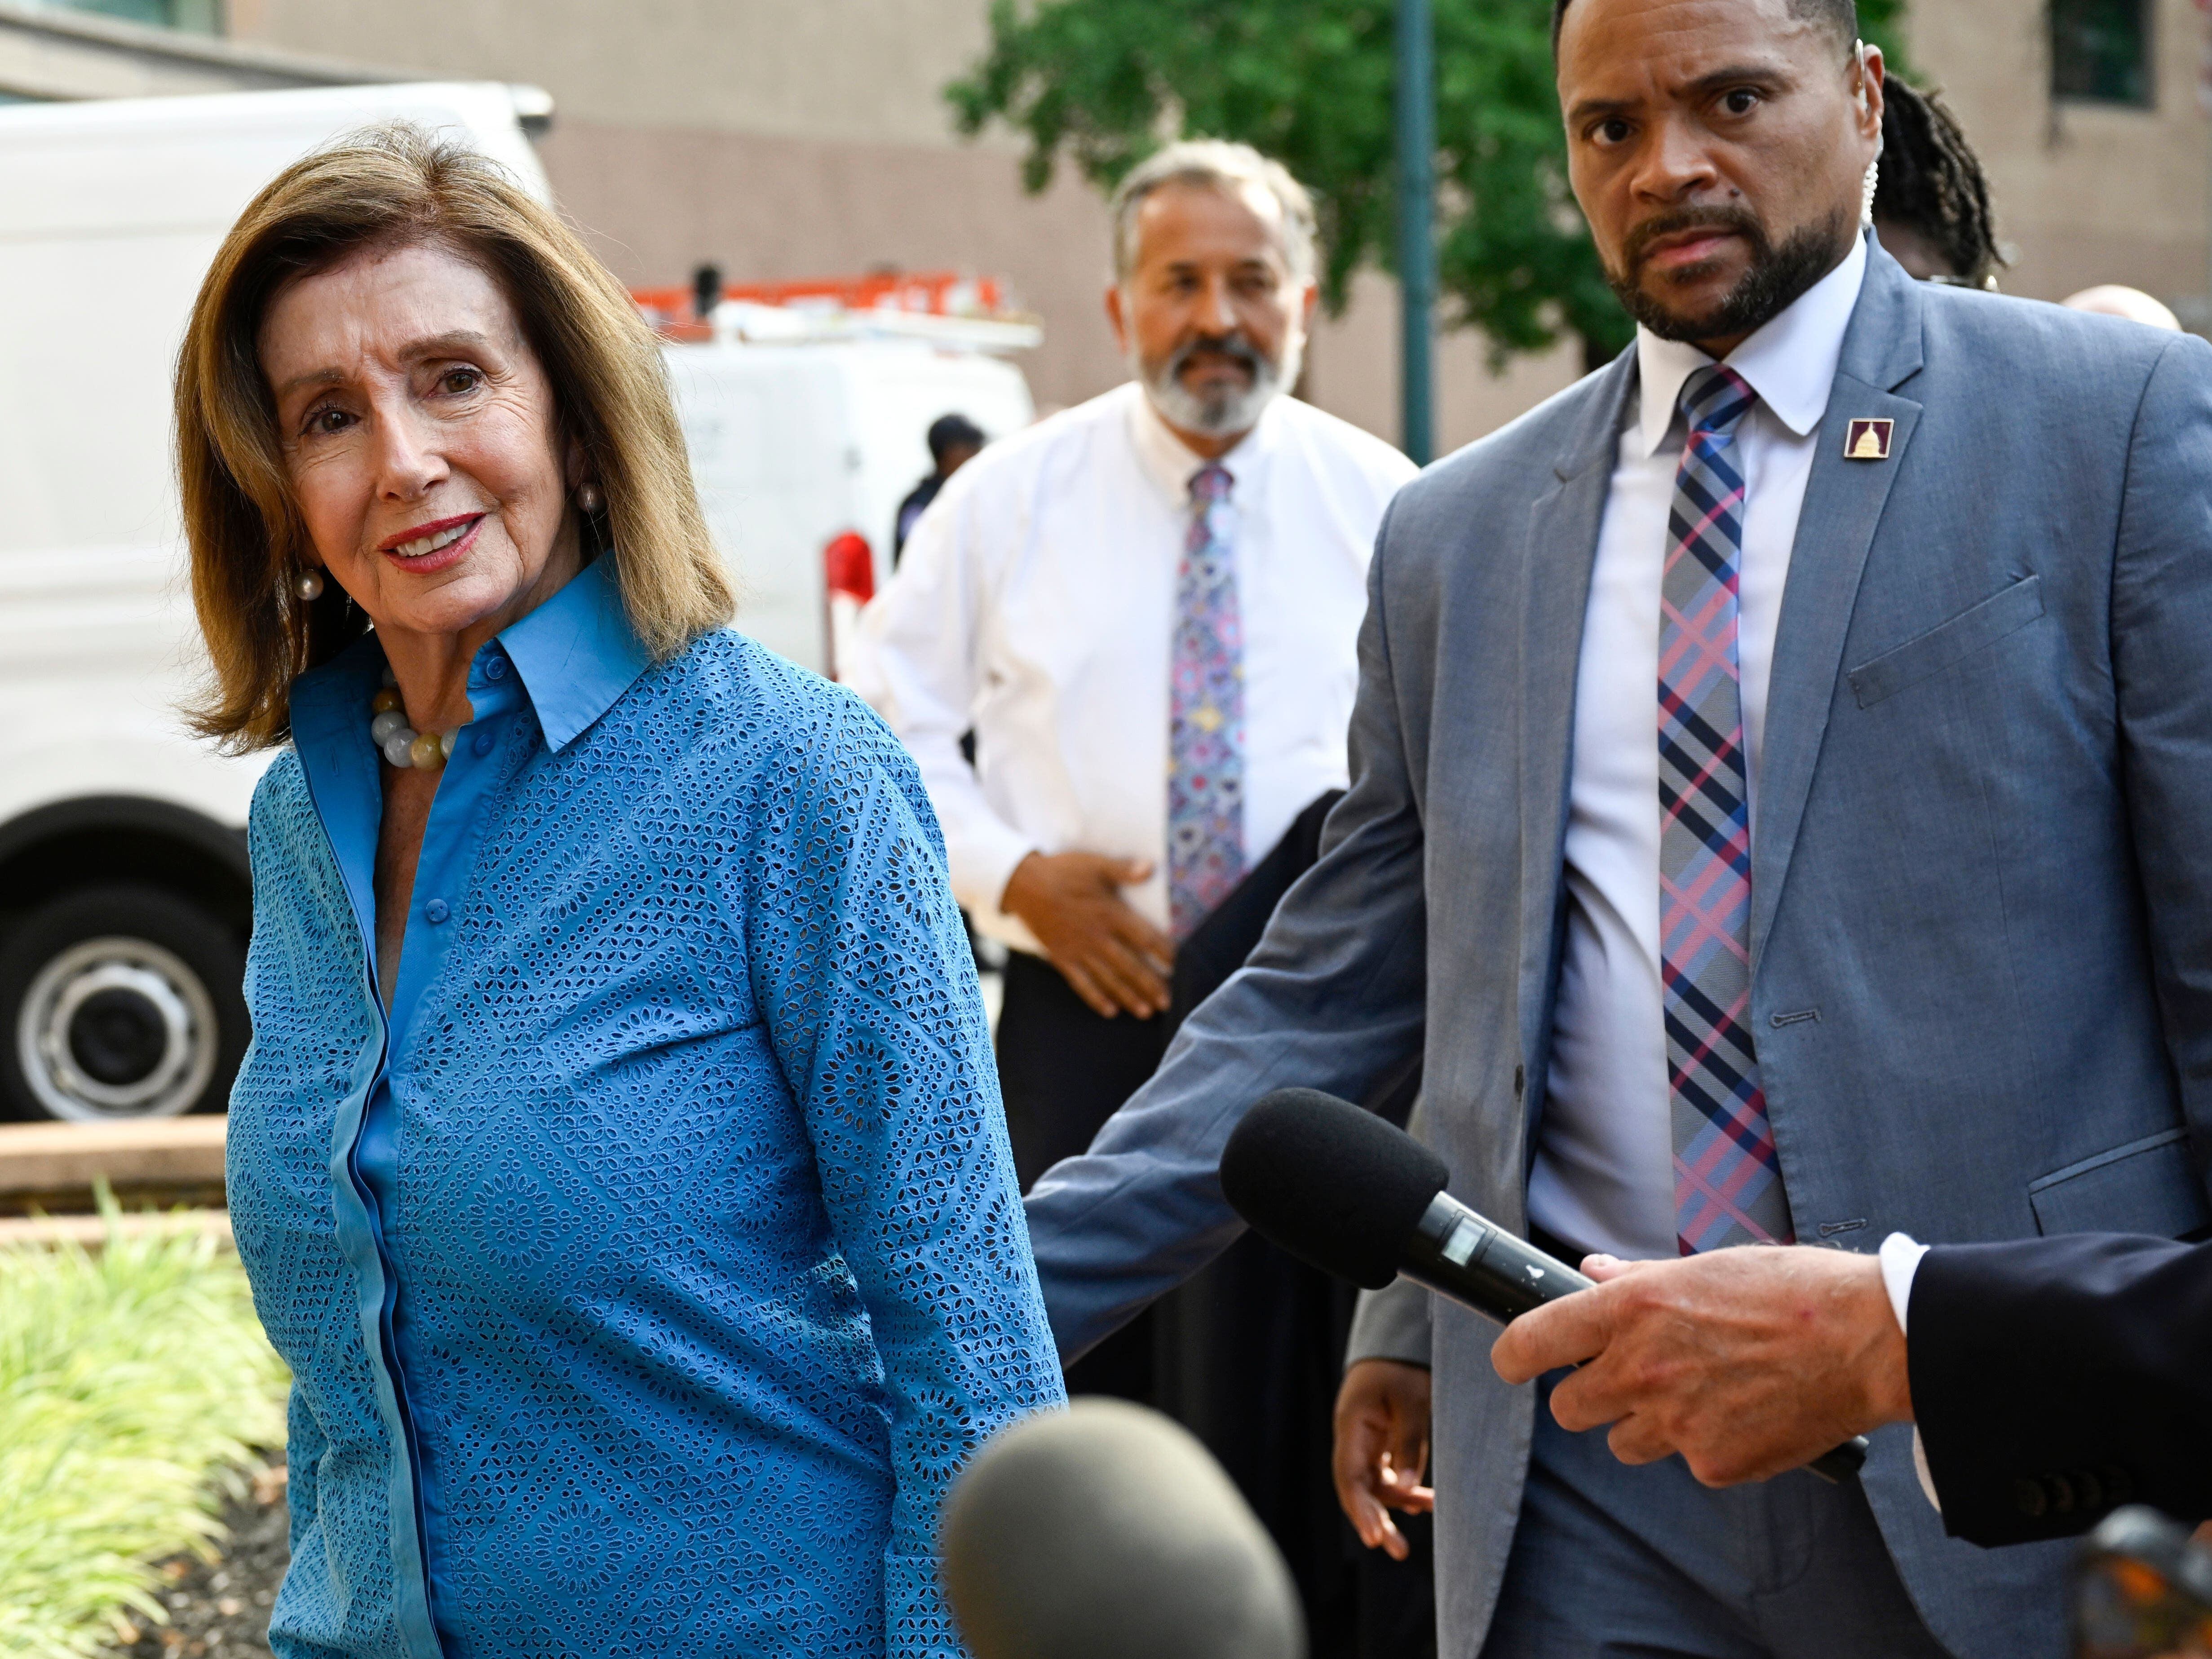 ‘It’s up to the president’ to decide whether to stay in the race, says Pelosi